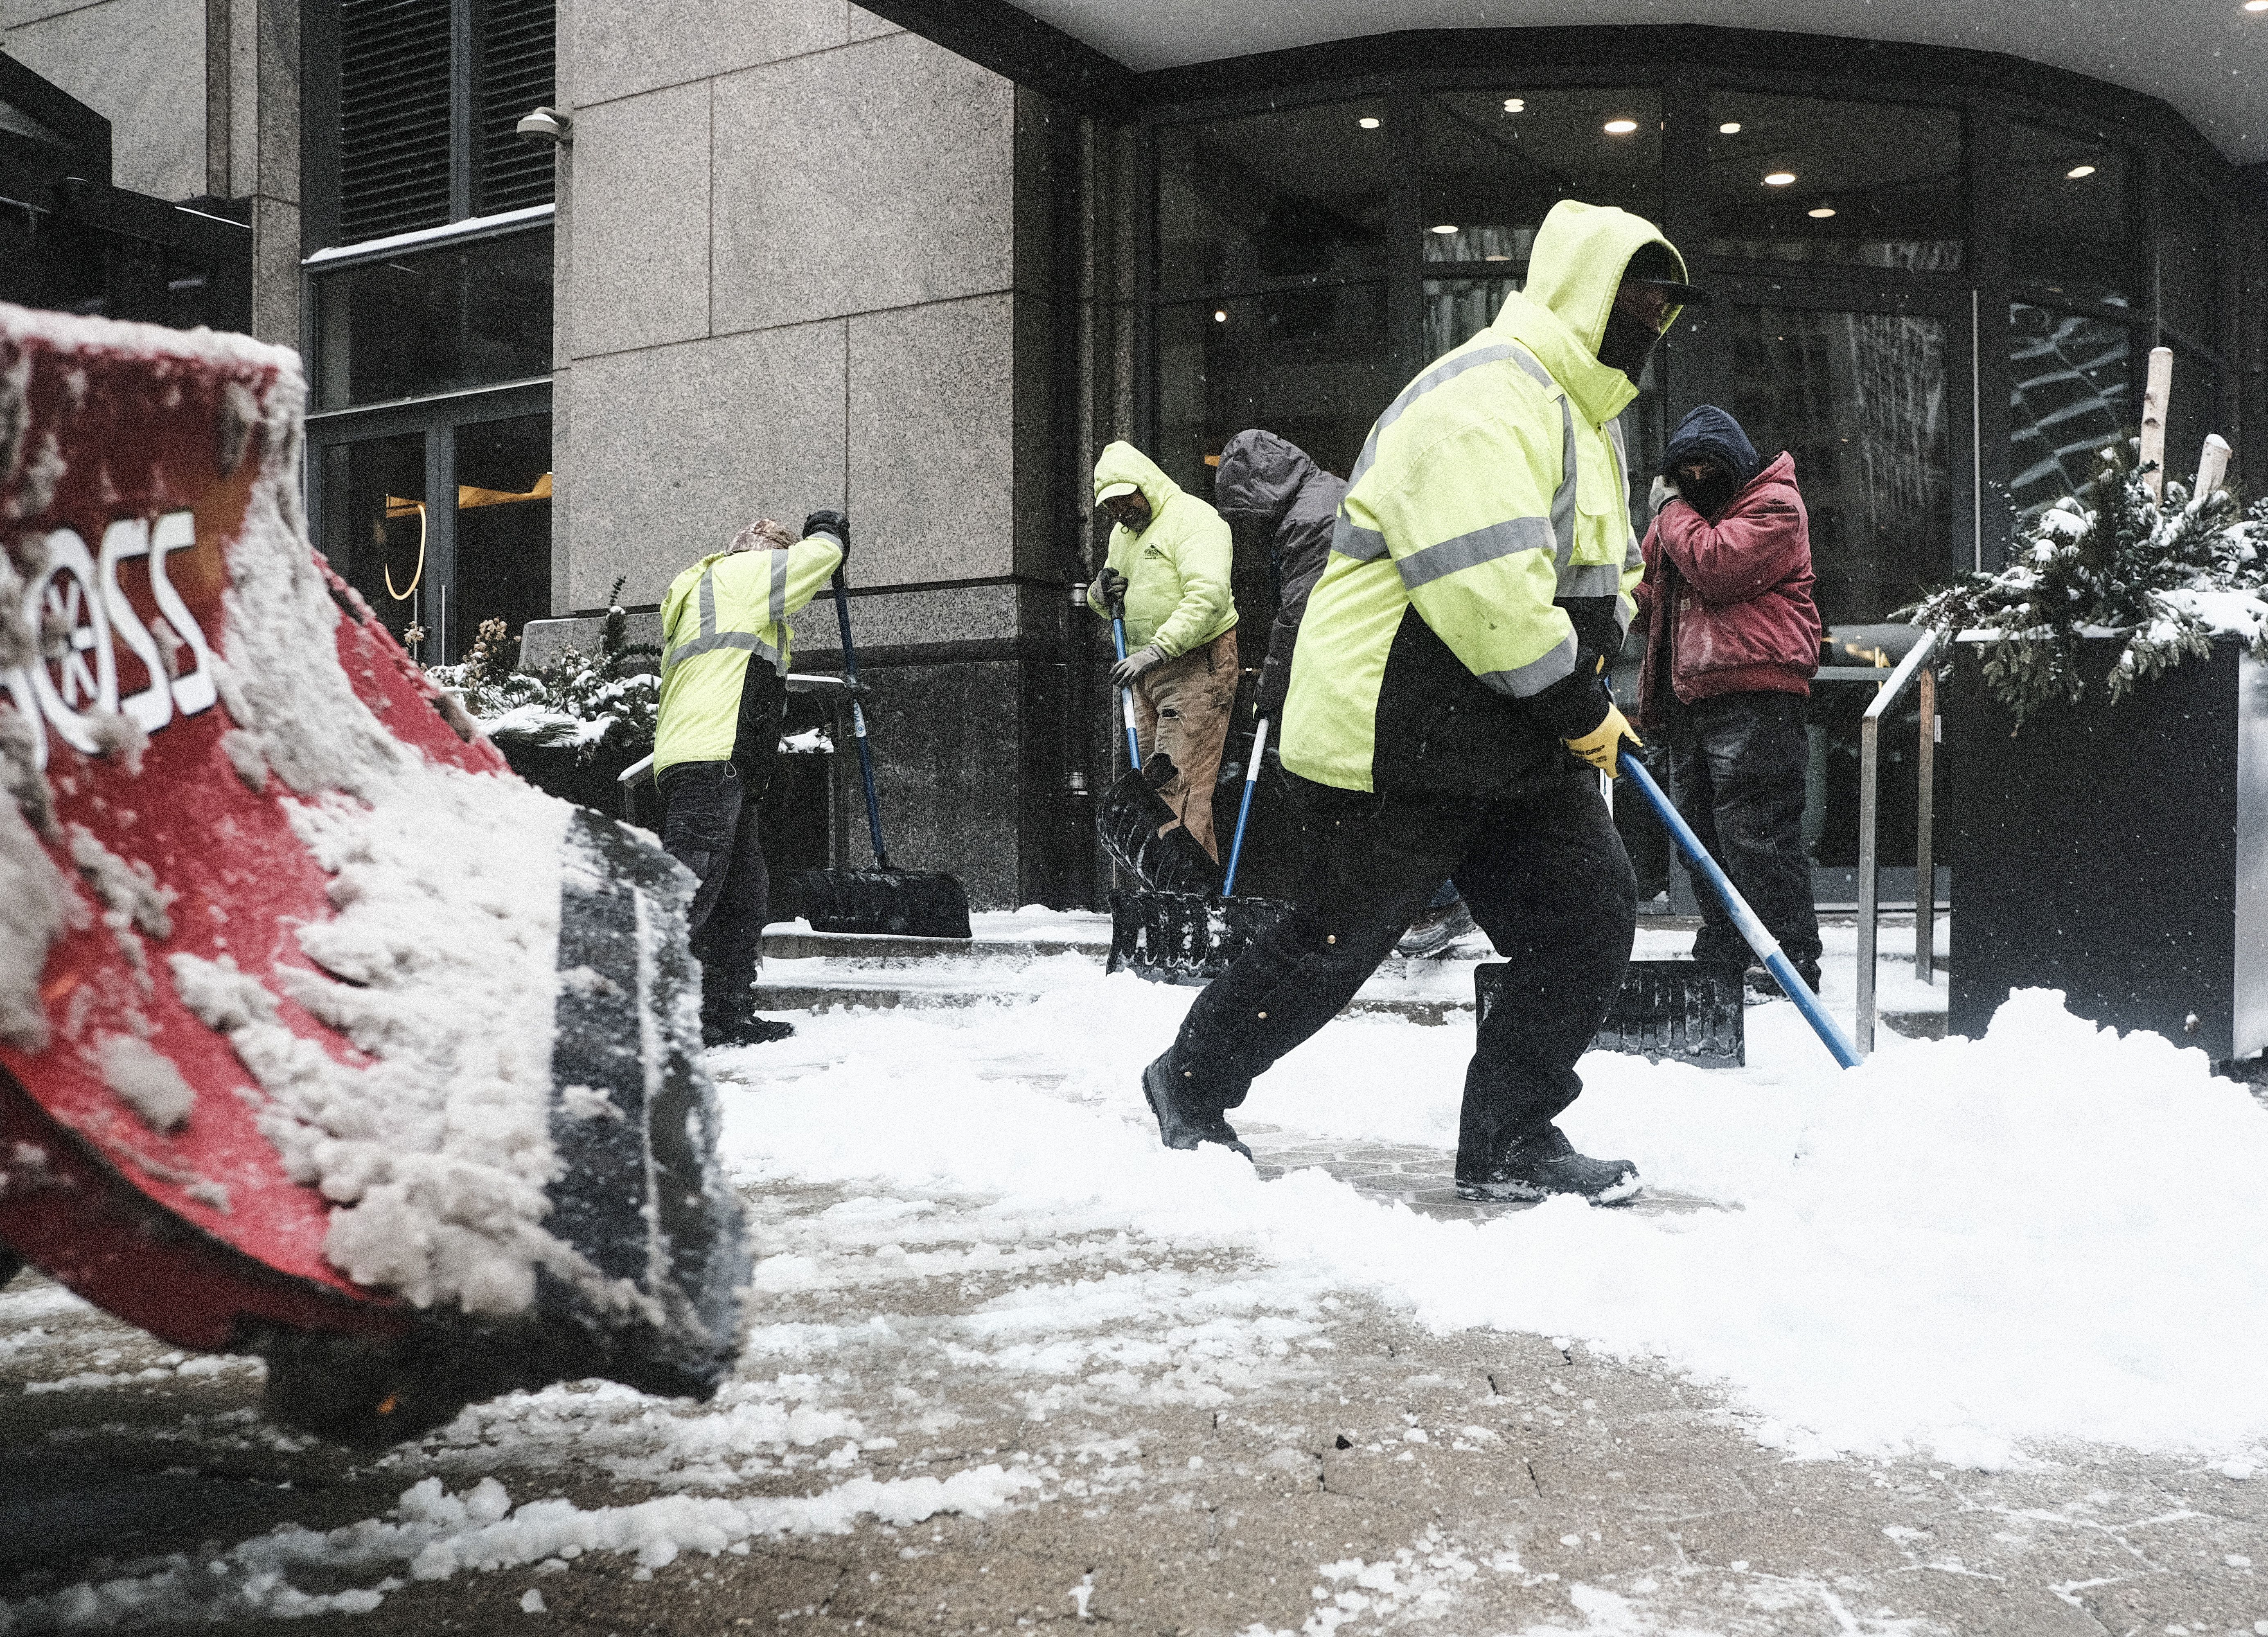 People shoveling snow during a storm in Detroit, Michigan, on Feb. 3.